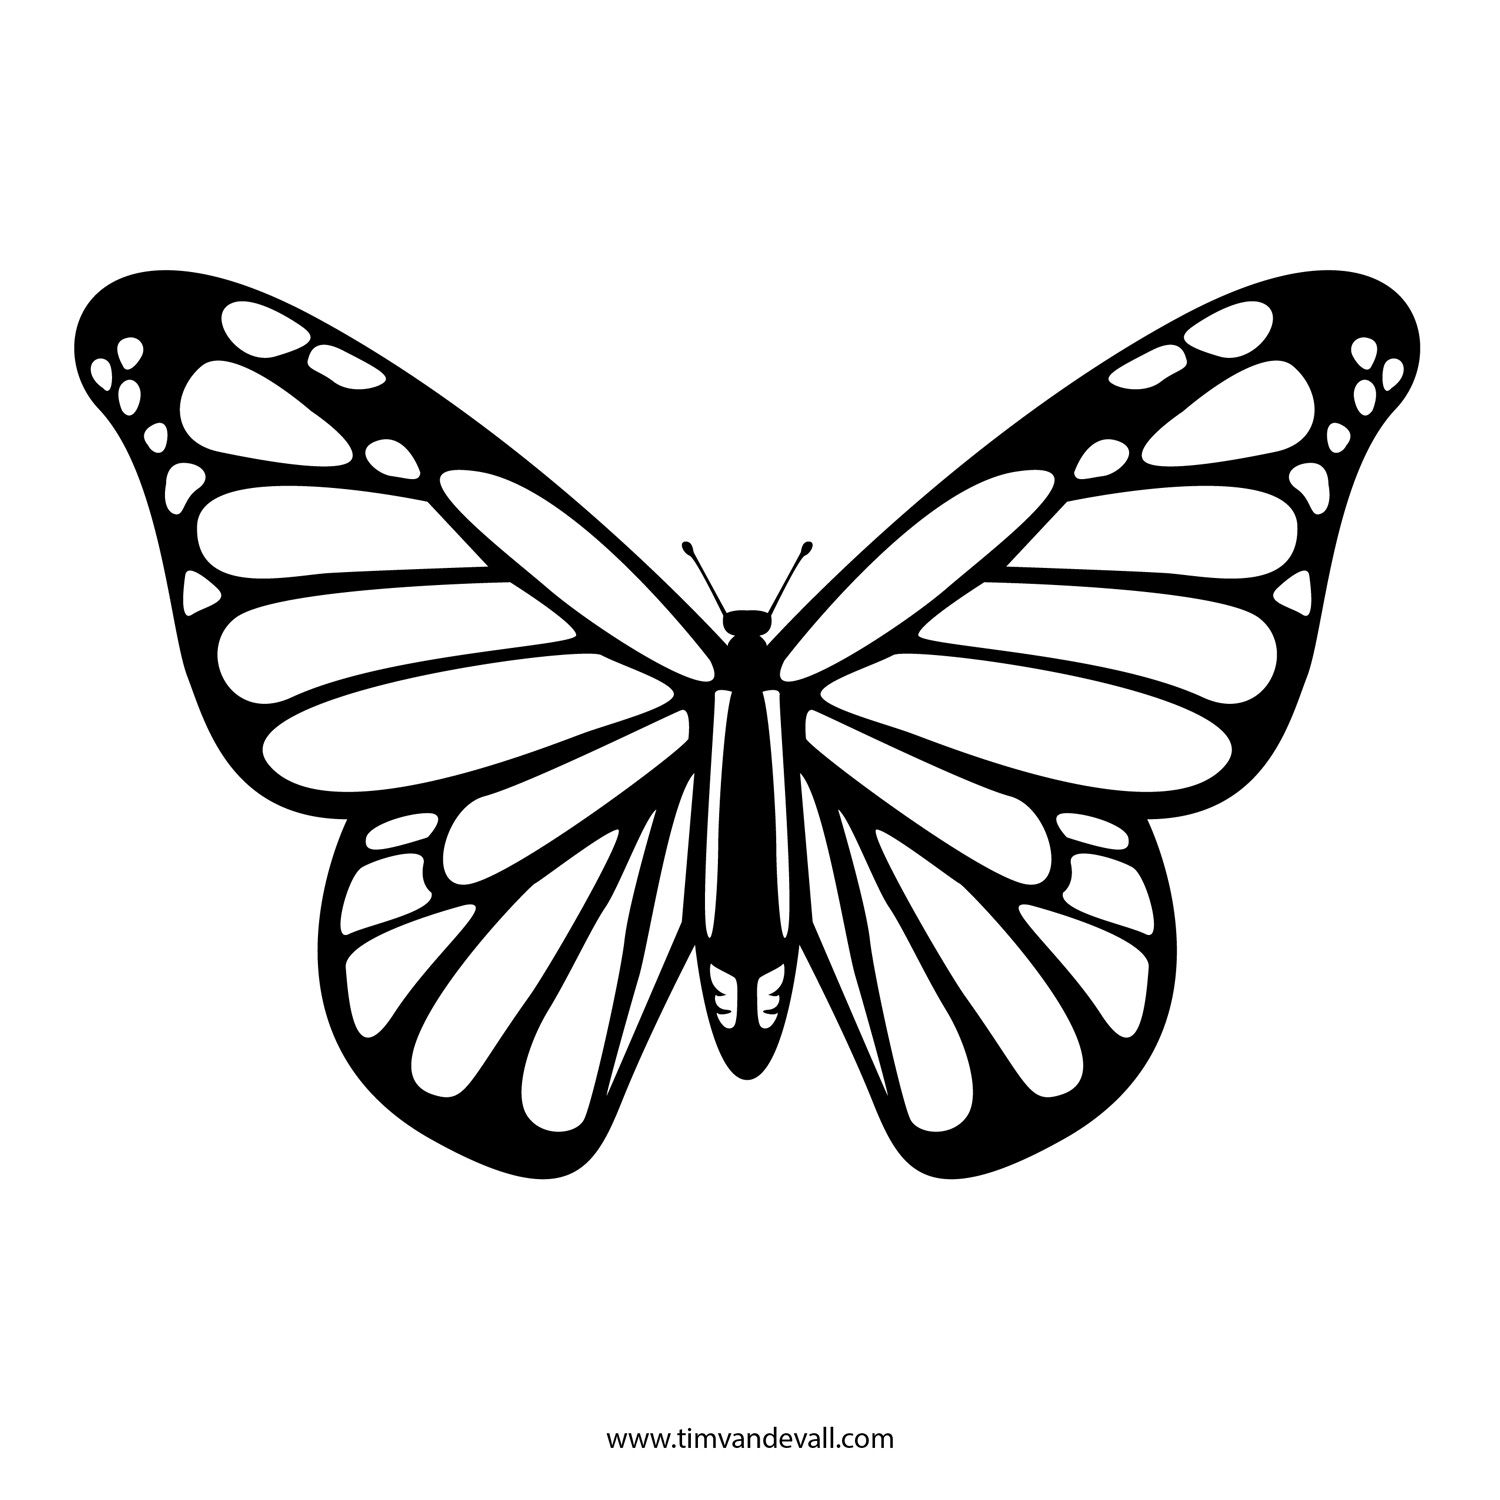 Free Printable Stencils In Lots Of Different Categories. Lots Of - Free Printable Butterfly Cutouts